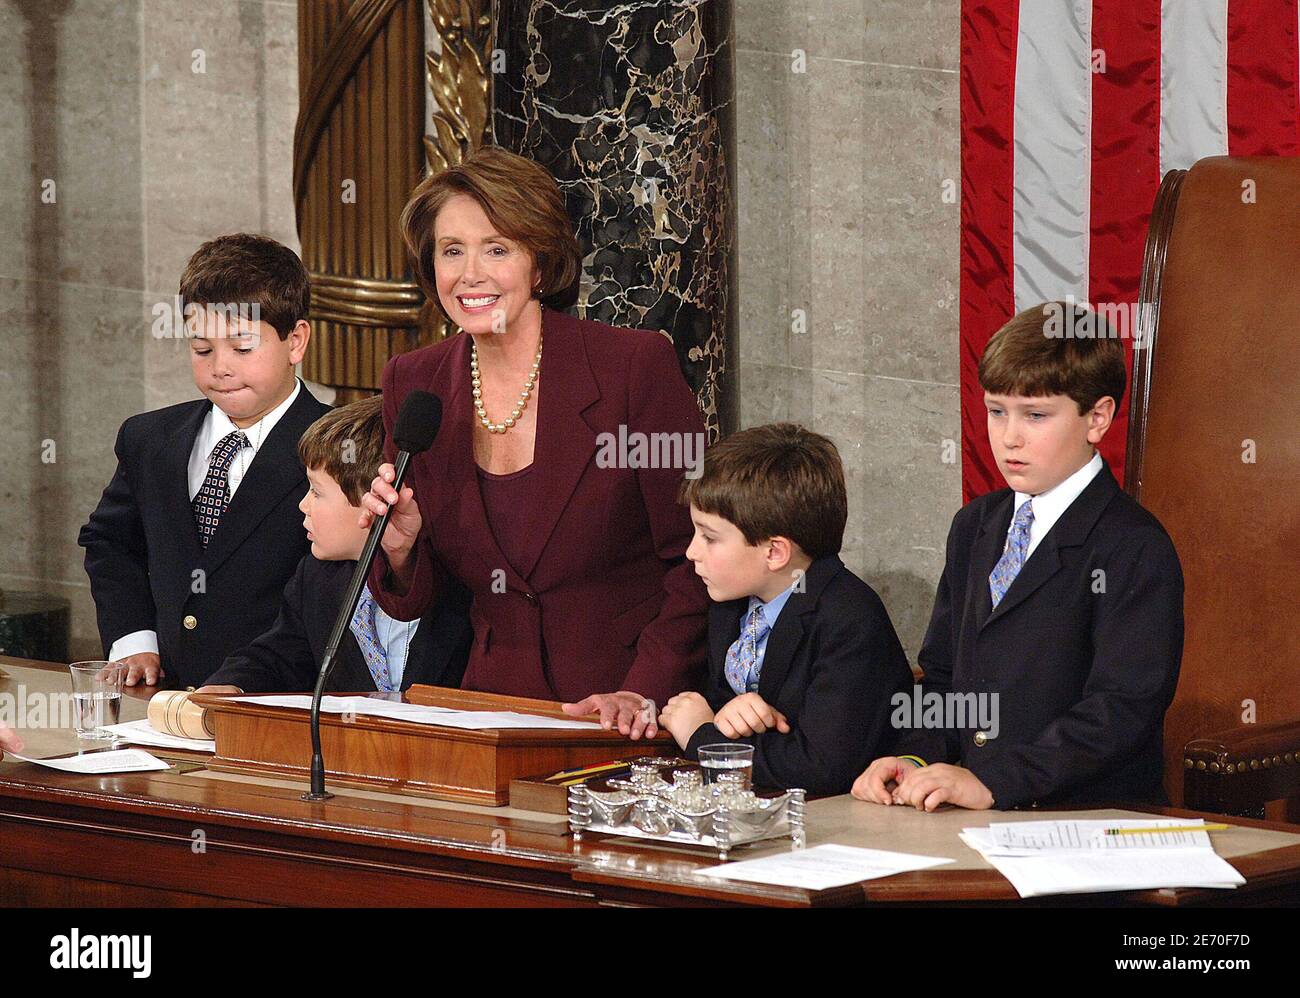 Speaker of the House Nancy Pelosi (D-CA)stands with her Grandsons after being elected as the first woman Speaker during a swearing in ceremony for the 110th Congress in the House Chamber of the U.S. Capitol, on January 4, 2007 in Washington, DC, USA. Pelosi will lead House Democrats as the Democratic Party takes control of both houses of Congress. Photo by Olivier Douliery/ABACAPRESS.COM Stock Photo